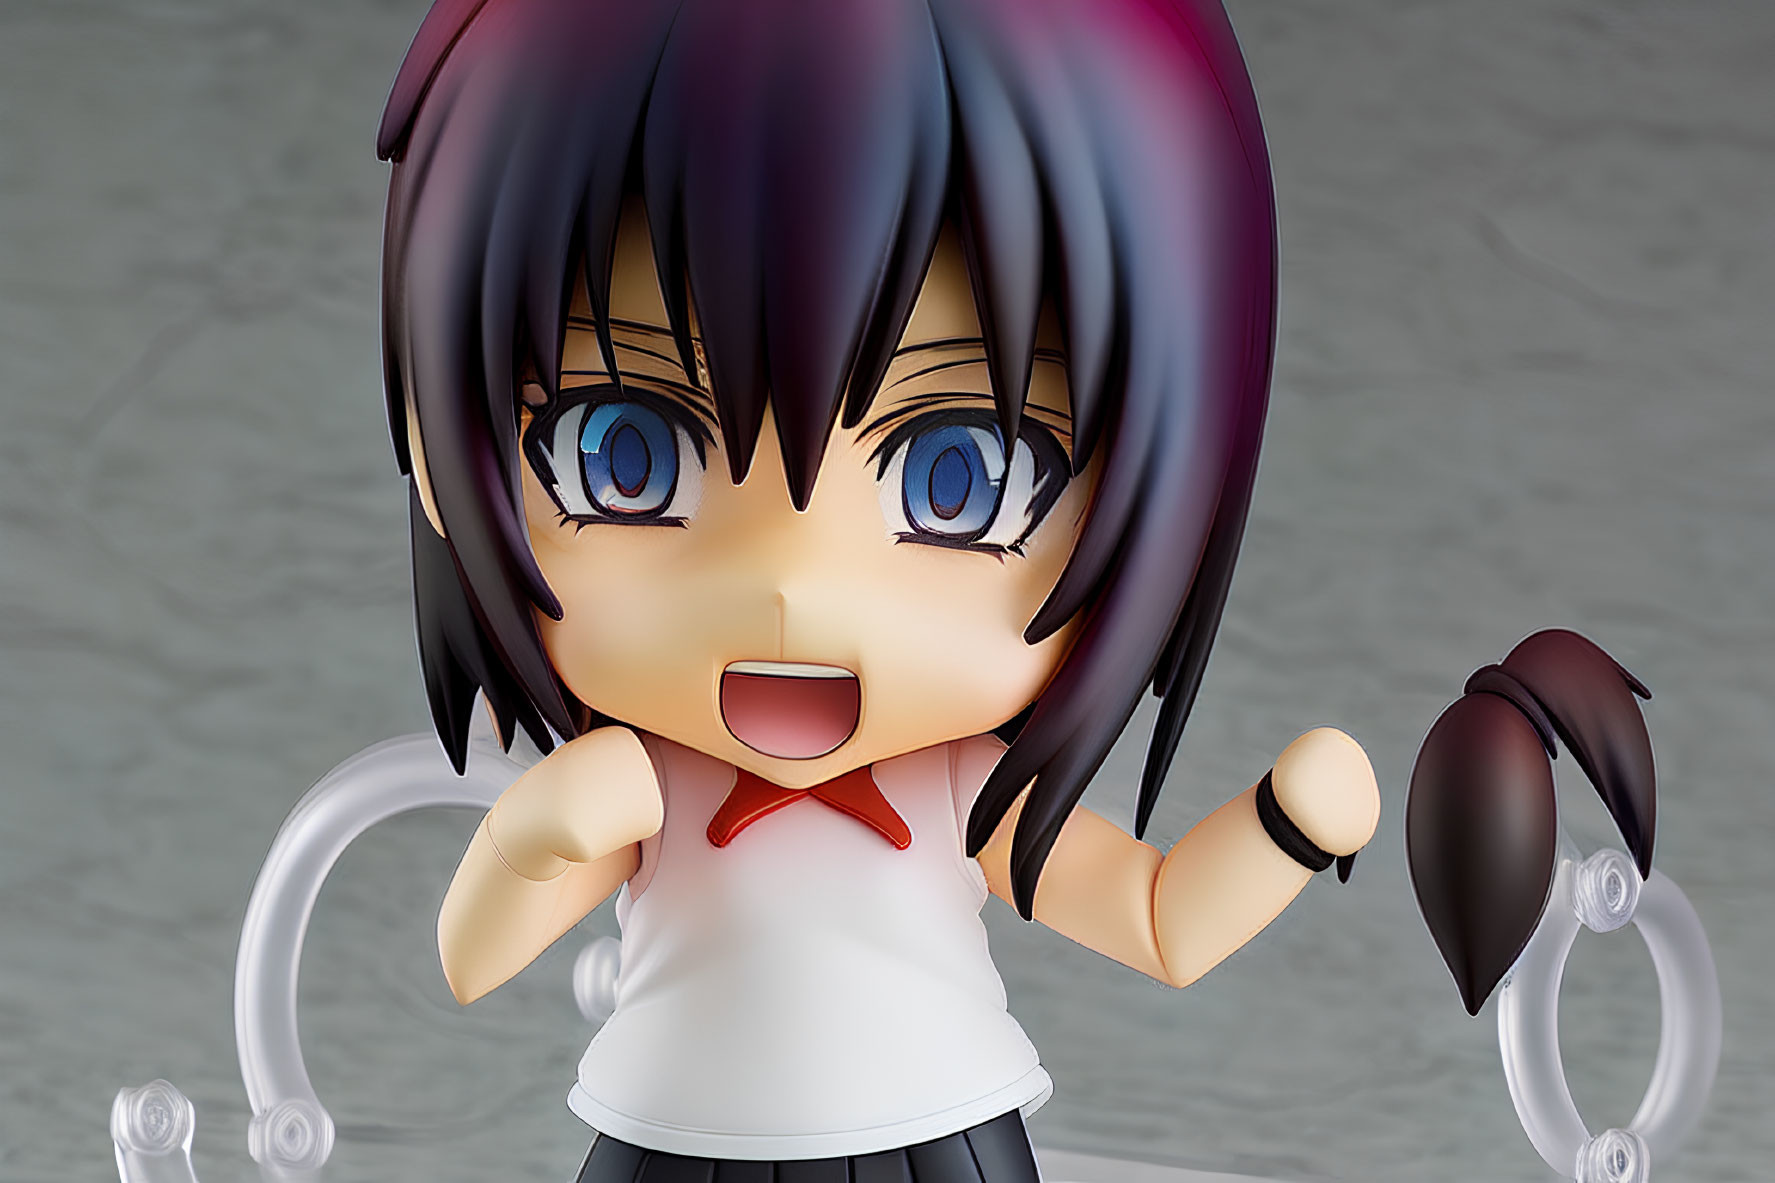 Anime-style figurine with purple-black hair and blue eyes in white top with red tie.